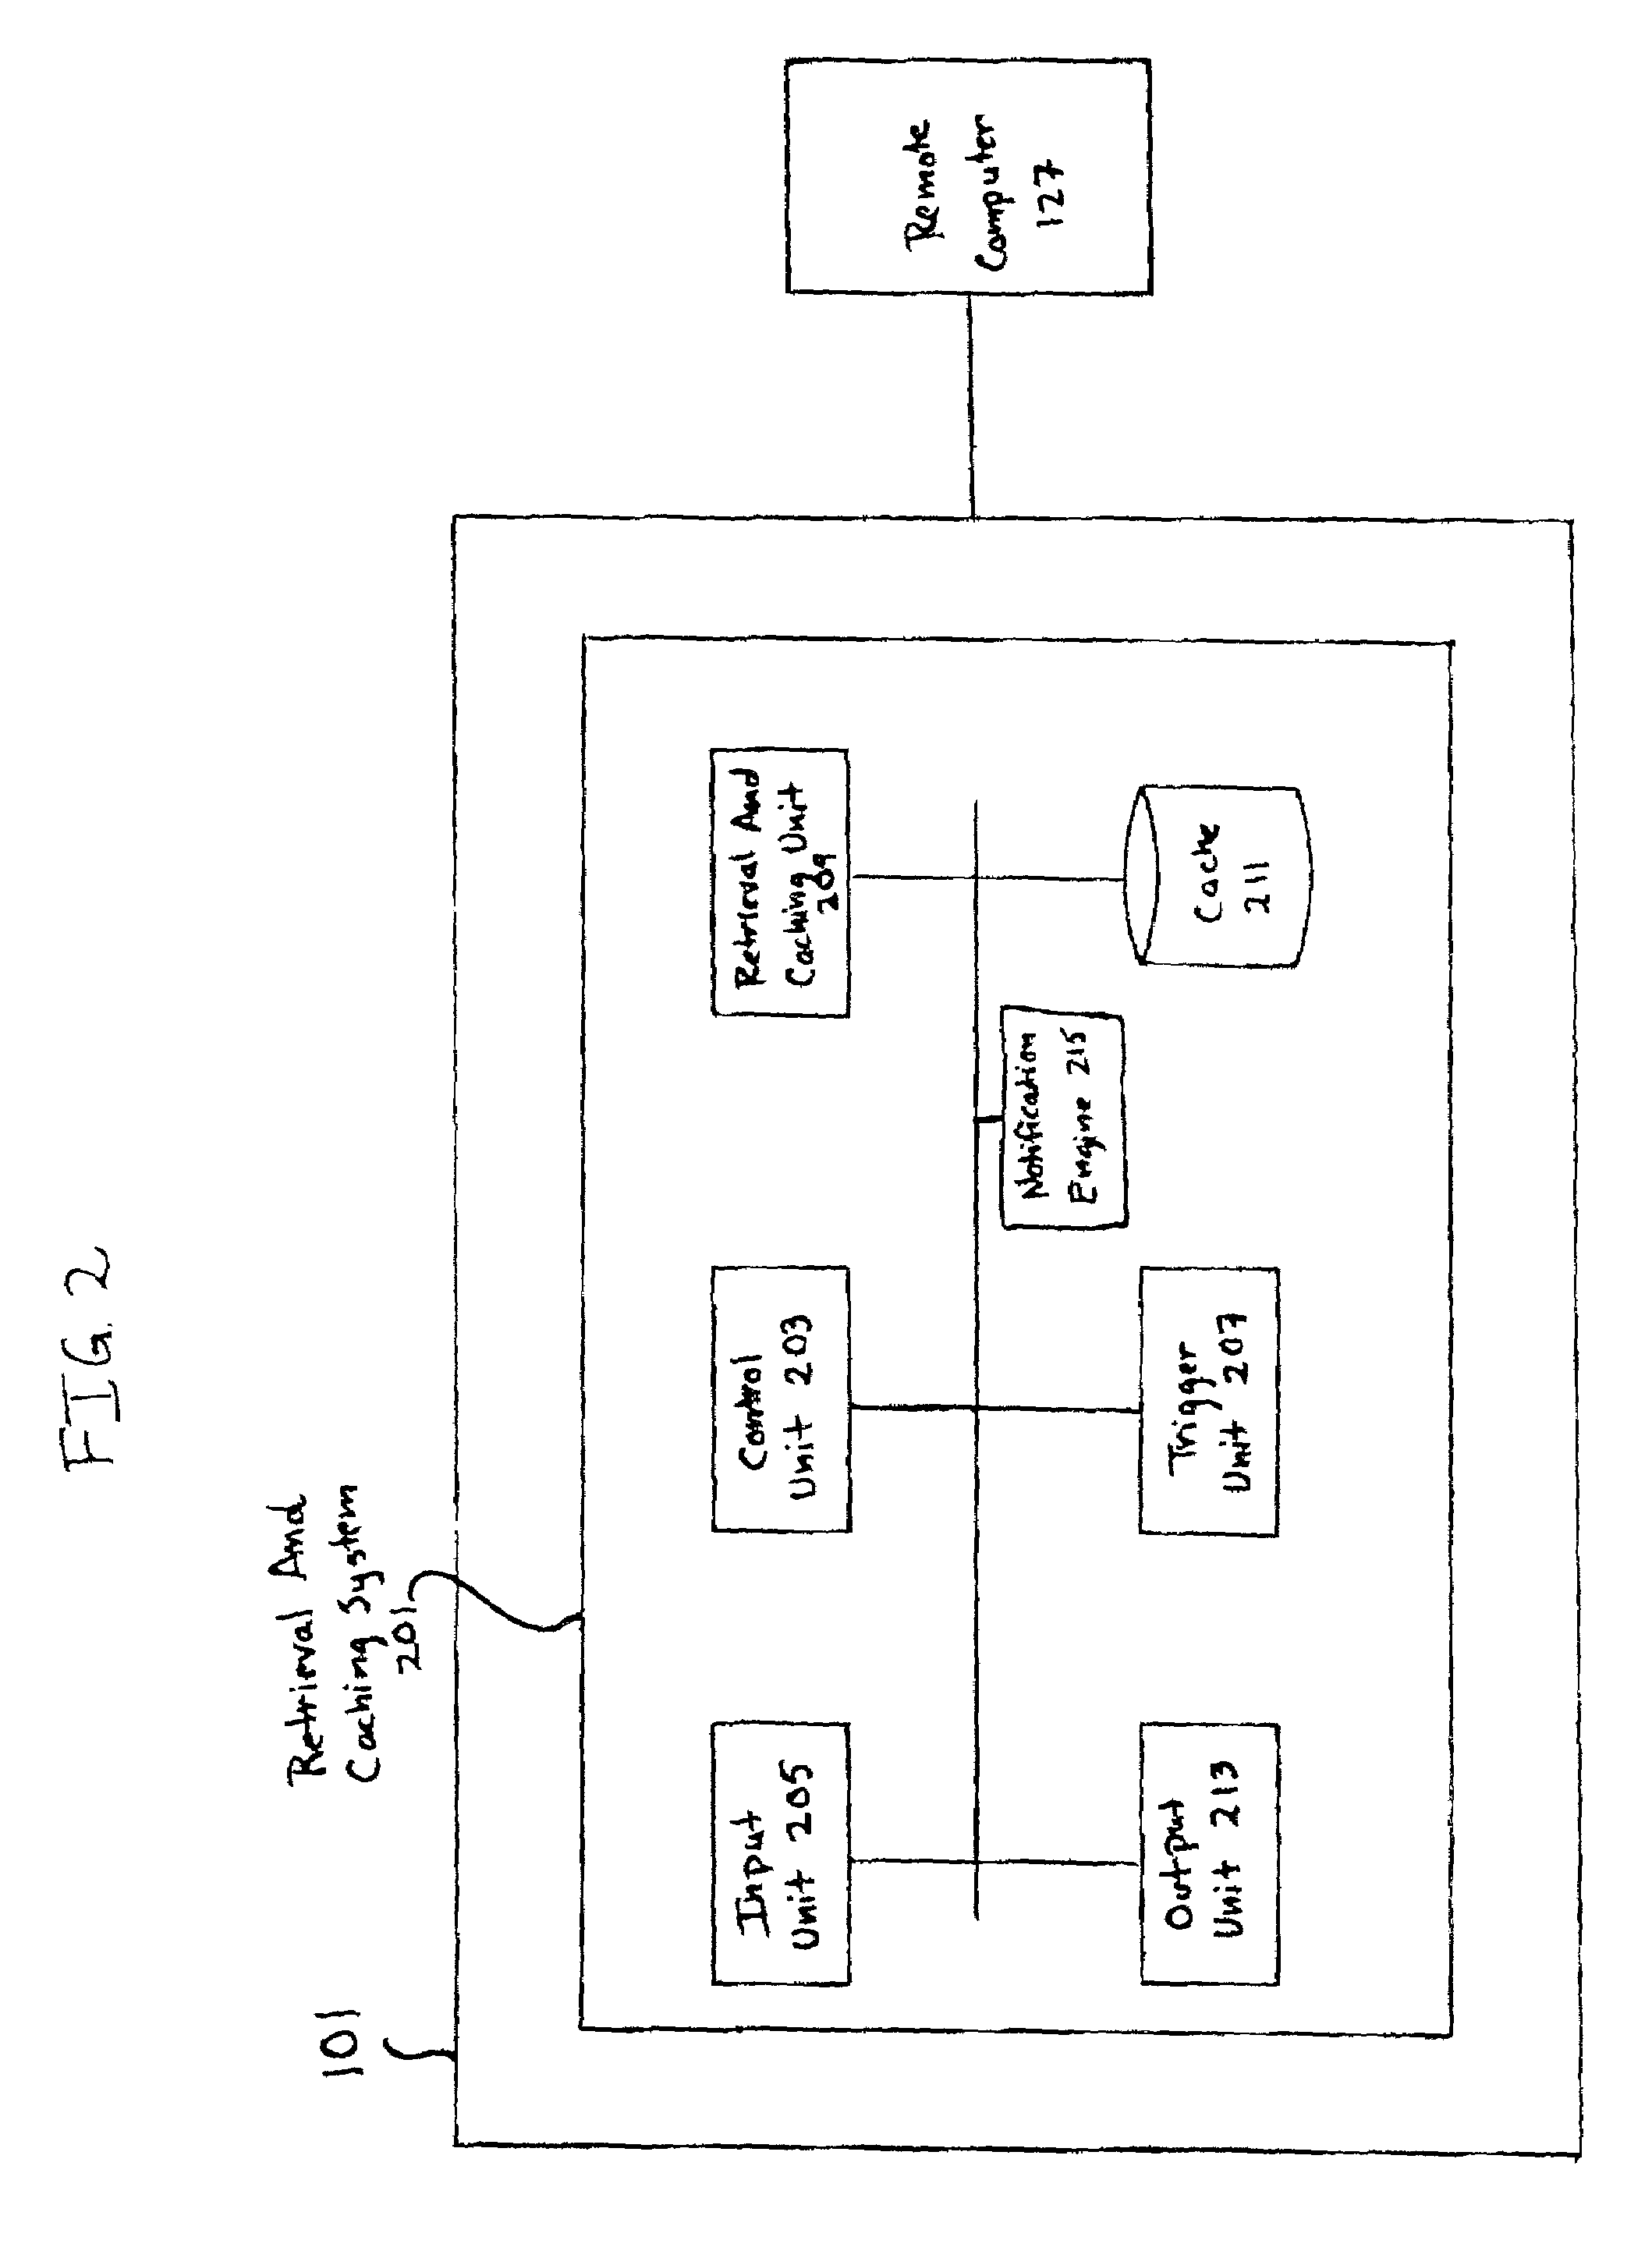 System and method for progressive and hierarchical caching